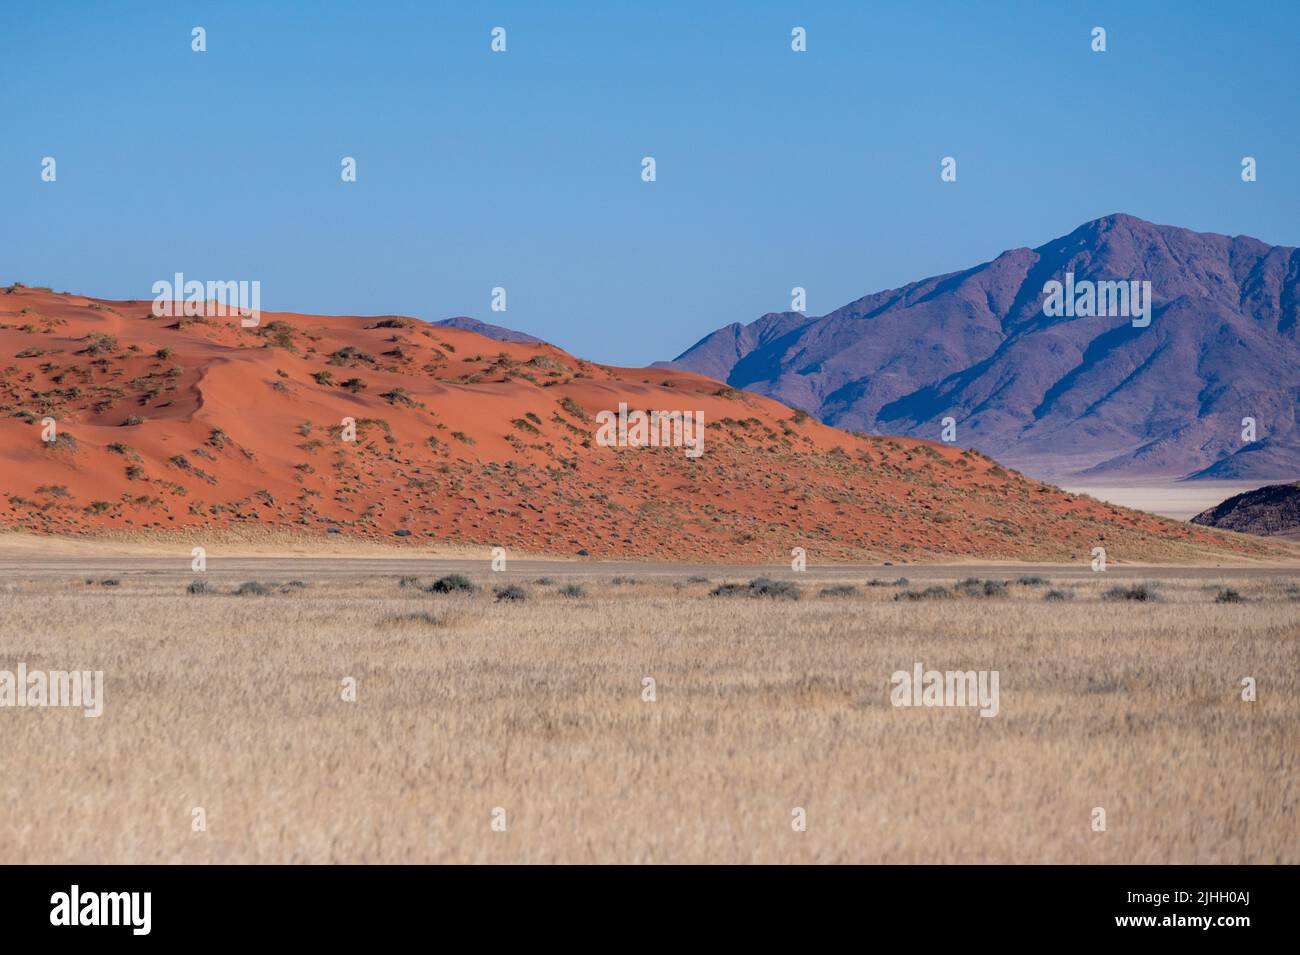 Sand dunes in the desert with blue sky background. Stock Photo